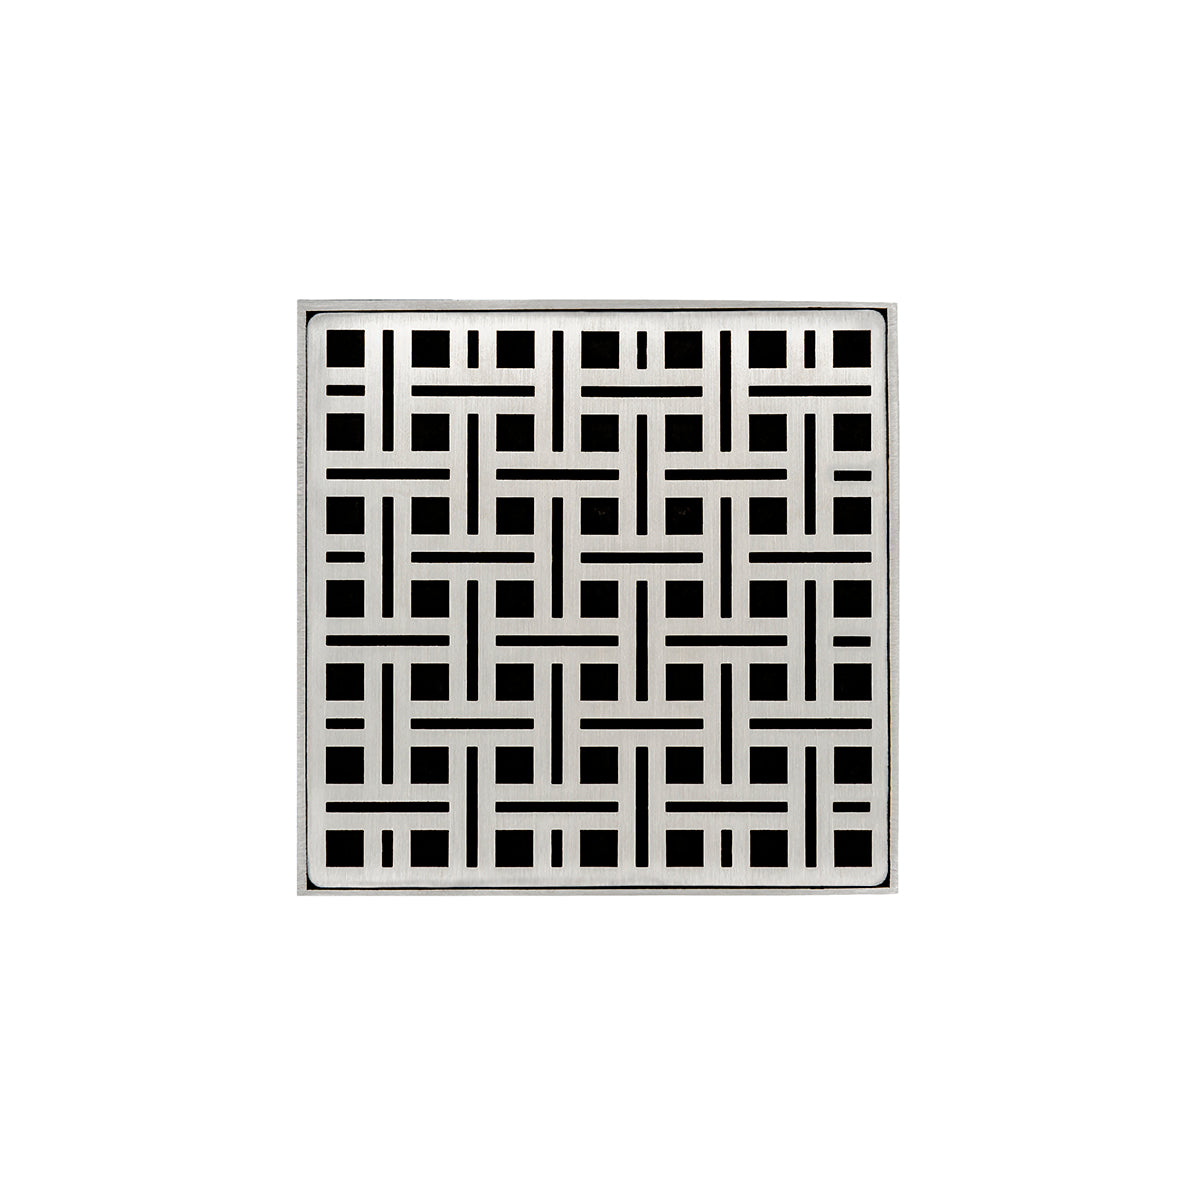 Infinity Drain 5" x 5" Strainer Premium Center Drain Kit with Weave Pattern Decorative Plate and 2" Throat for VD 5